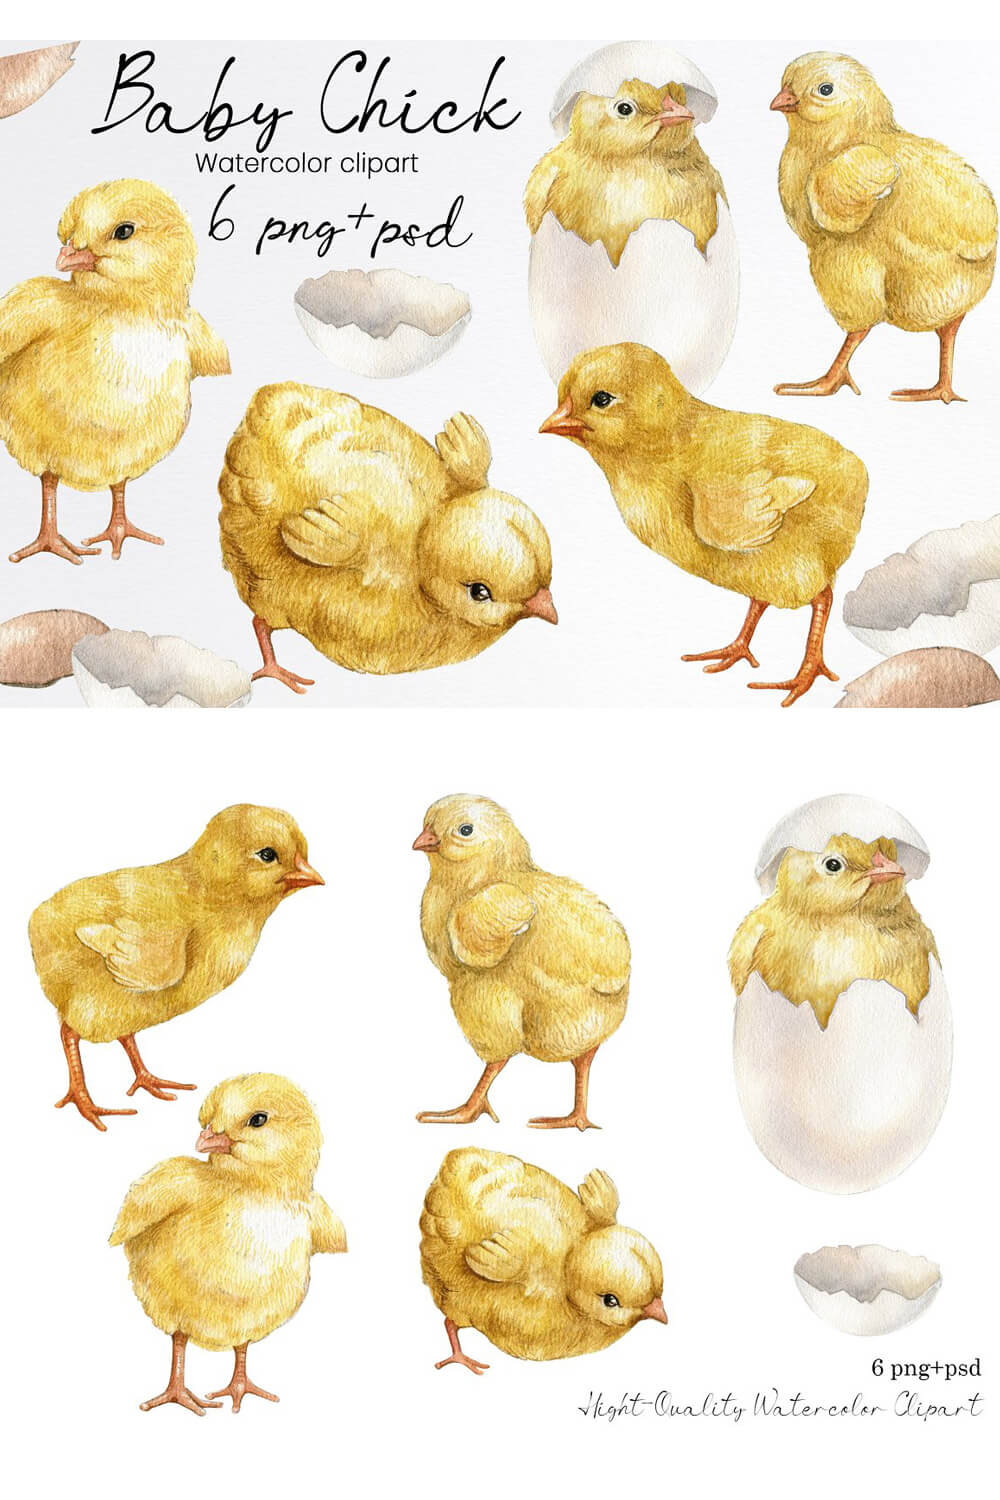 Ten Baby chick on image.